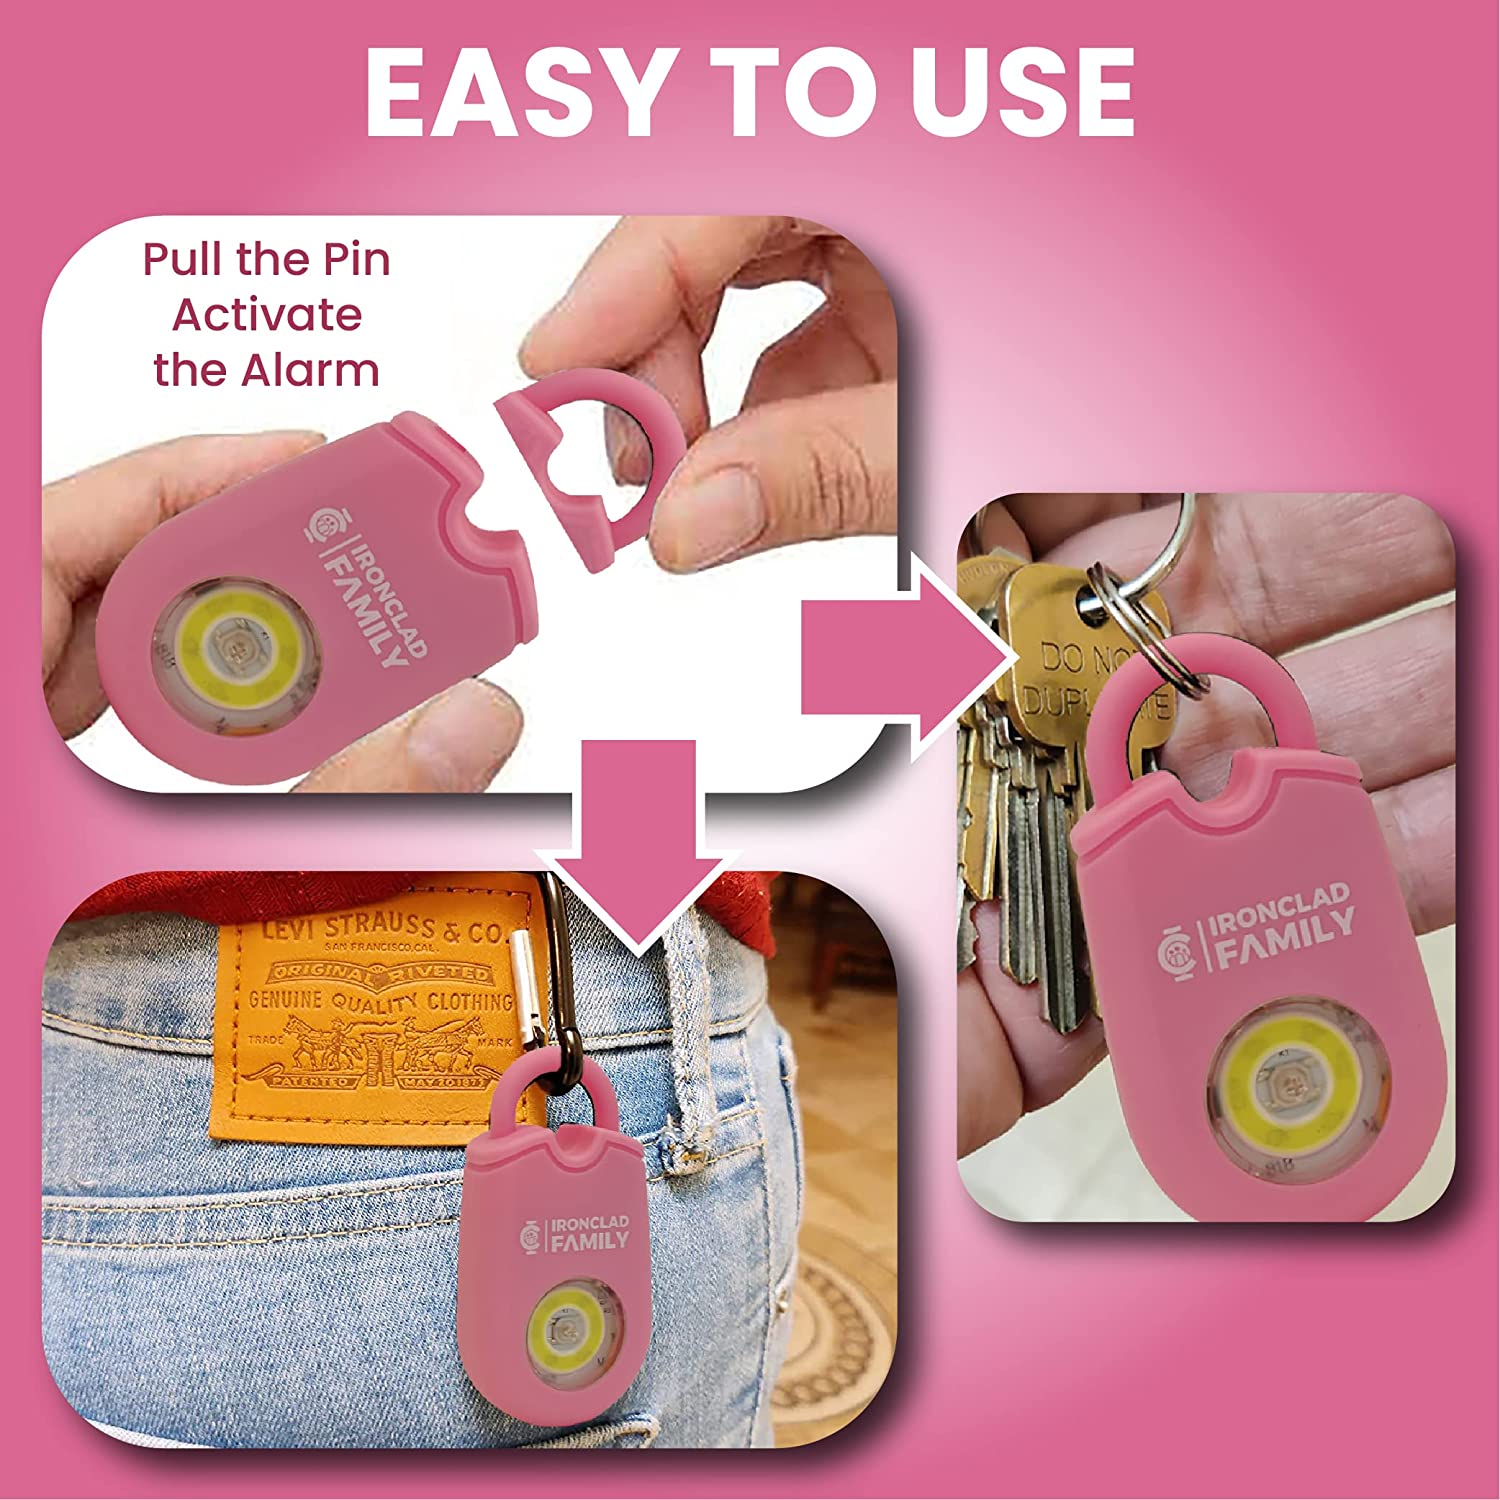 Pink keychain of the Personal Alarm with a key and a photo of a person holding a pink key